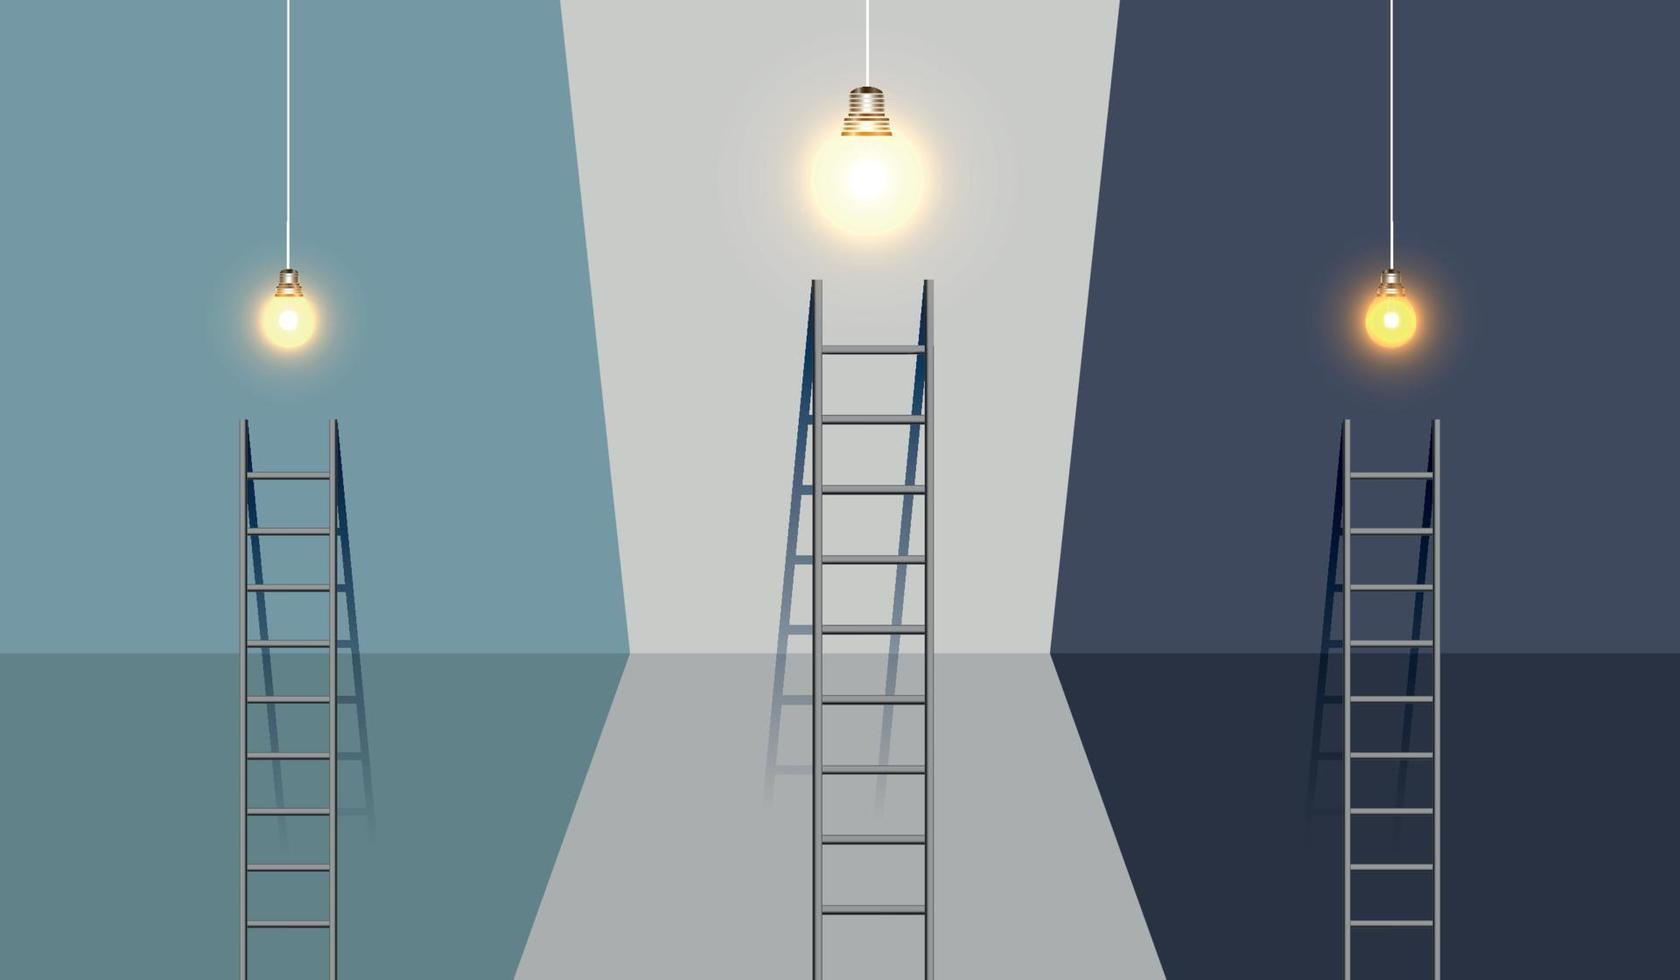 Ladder and Light Multi Color Background Monochrome Photograph Image Design vector